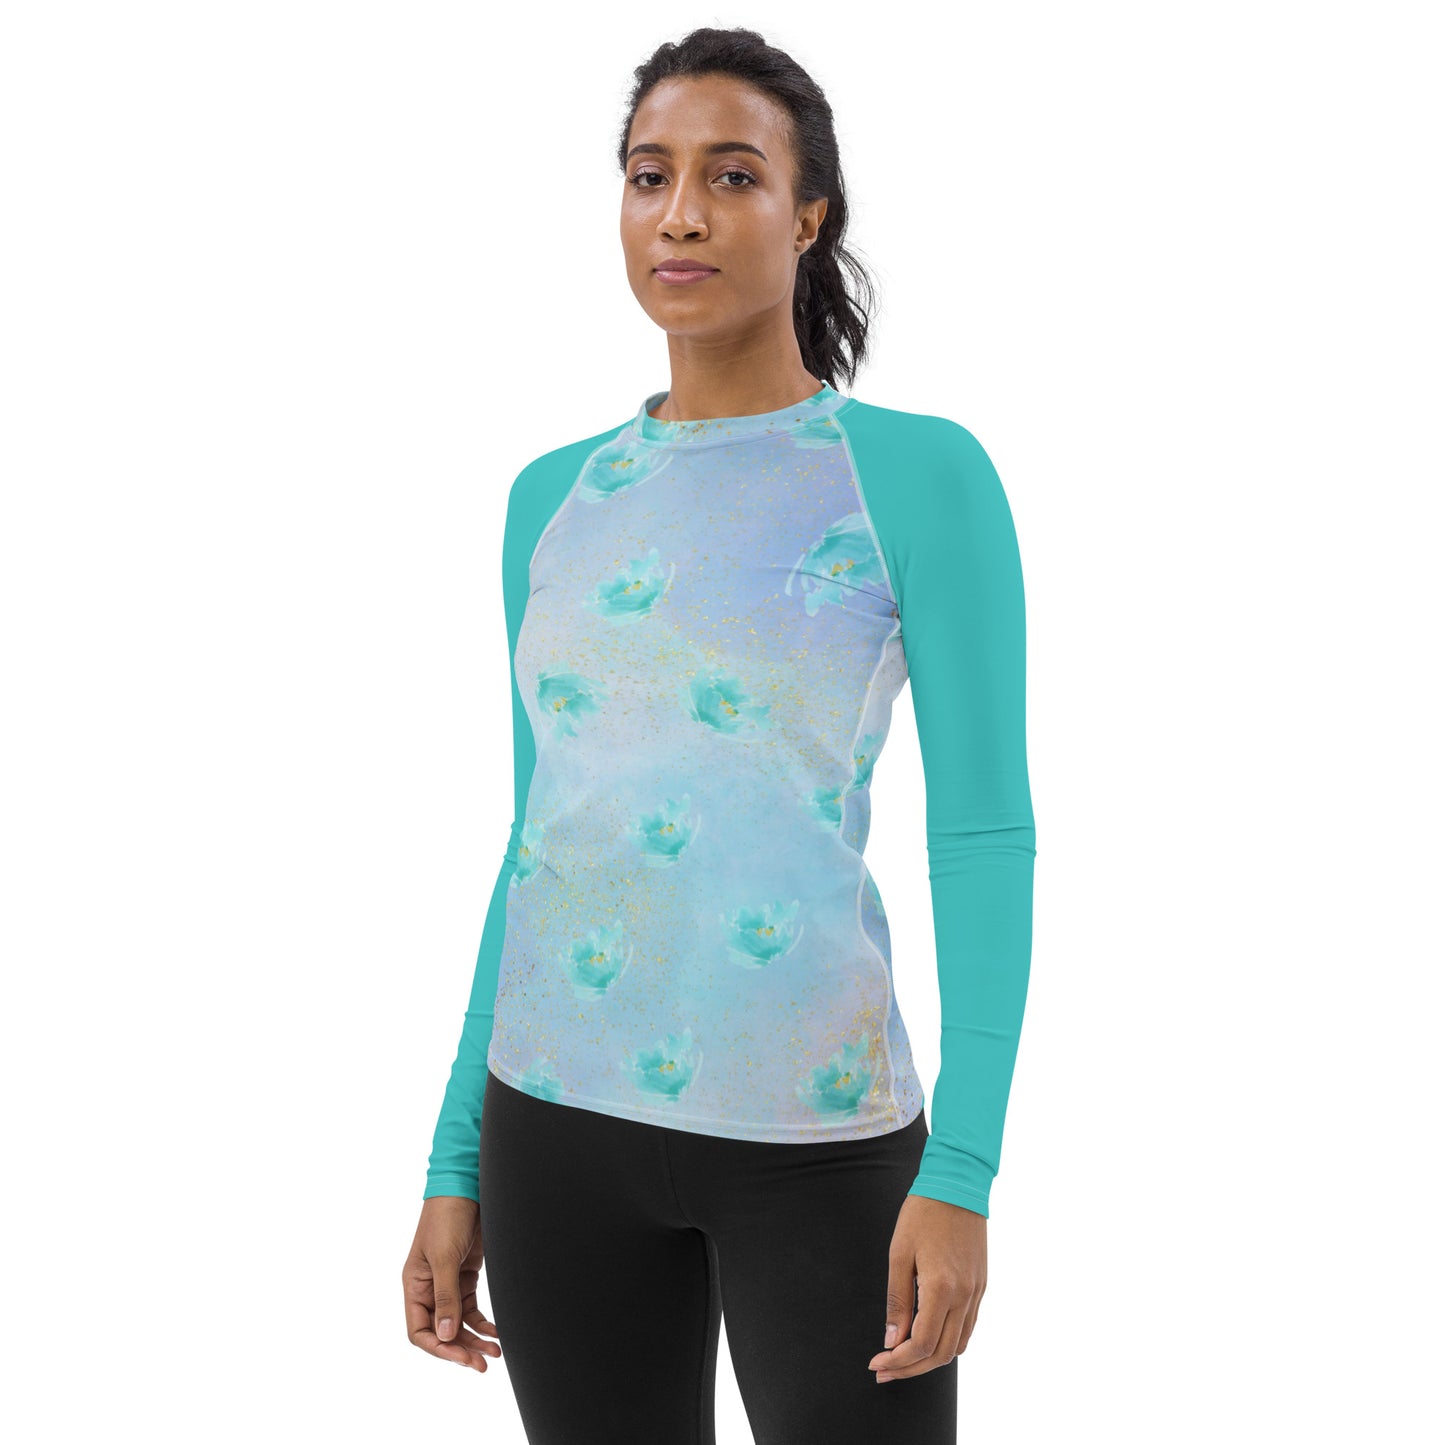 Women's All Over Print - Watercolors - Lightweight Long Sleeve Performance Shirt - 50+ UV Protection - Moisture Wicking